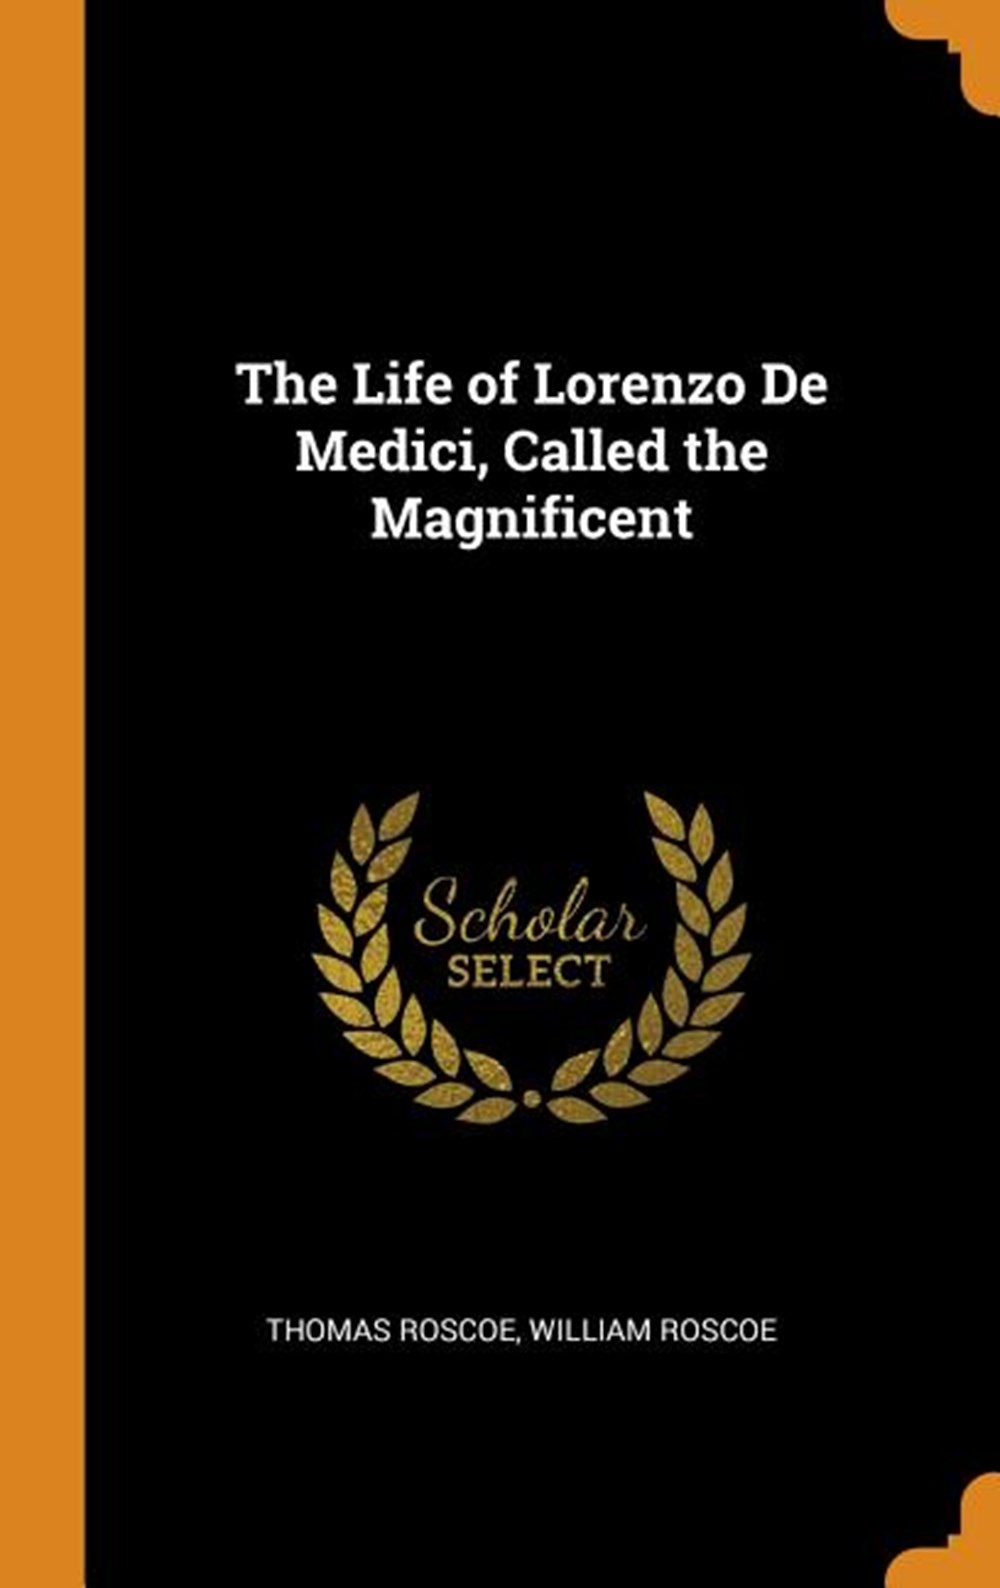 Life of Lorenzo de Medici, Called the Magnificent